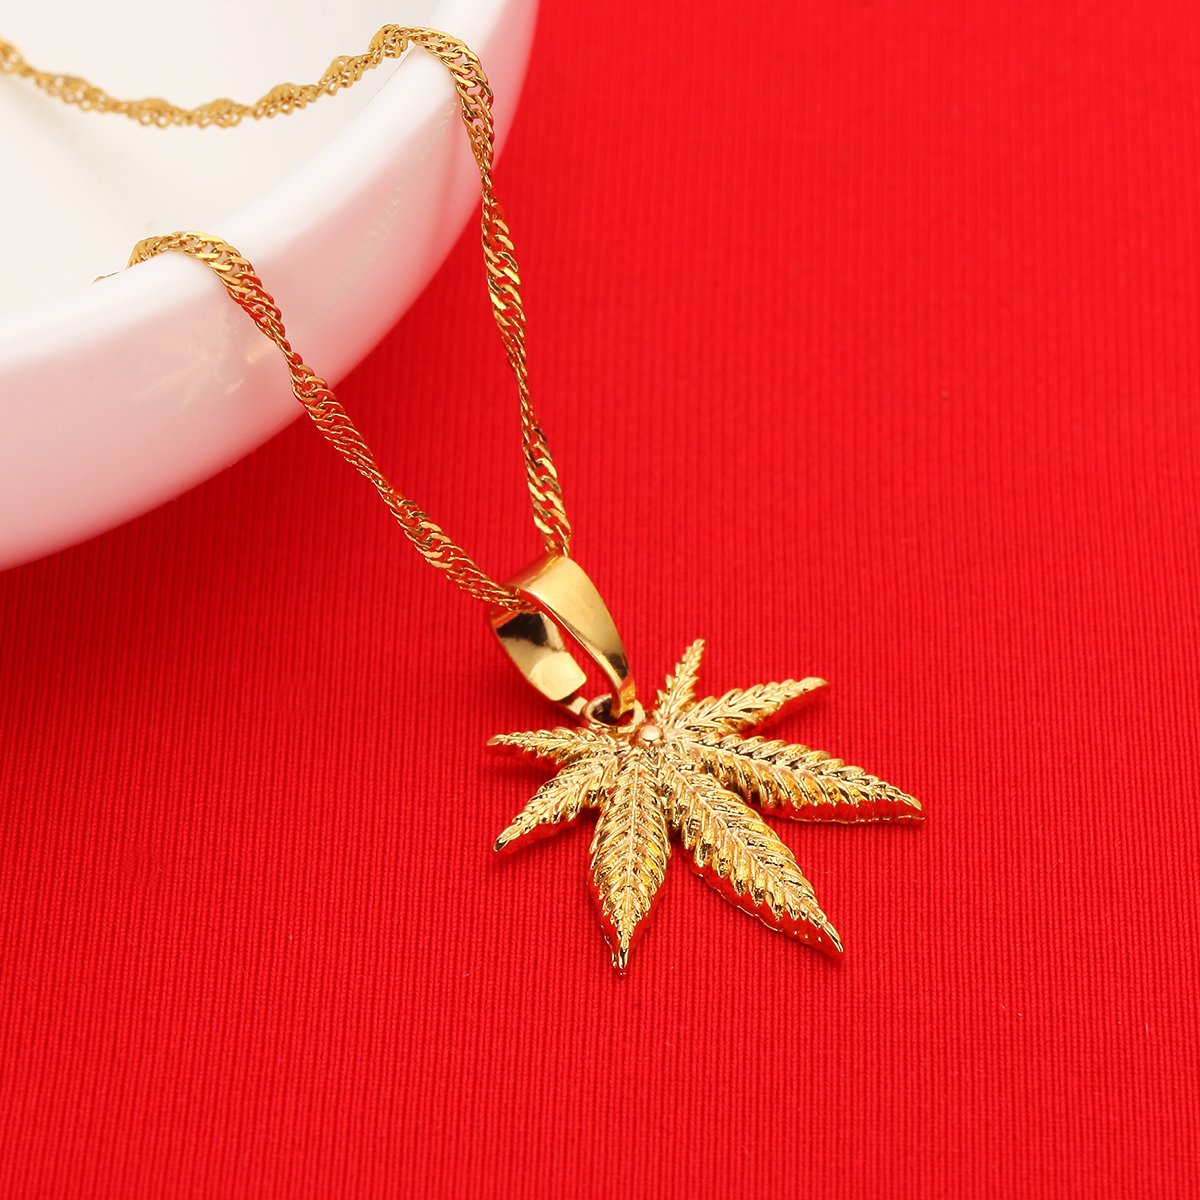 24K Yellow Gold Color Jewelry Cannabis Weed Marijuana Leaf Pendant Necklace